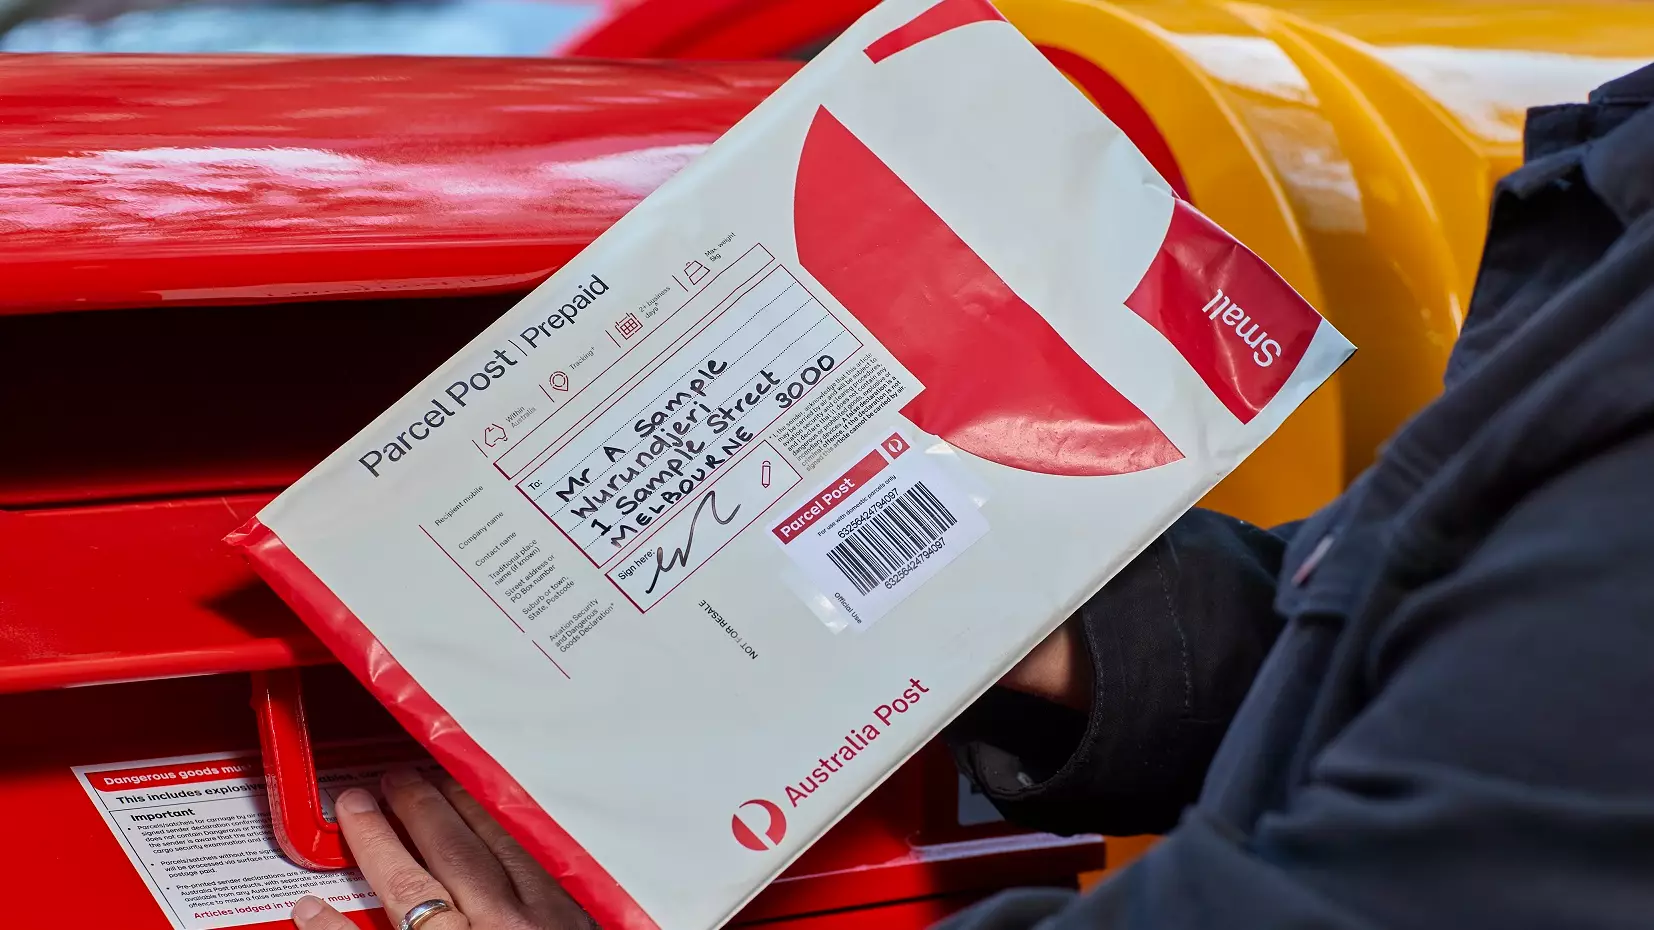 Australia Post Will Now Use Traditional Place Names Thanks To Indigenous Woman's Campaign